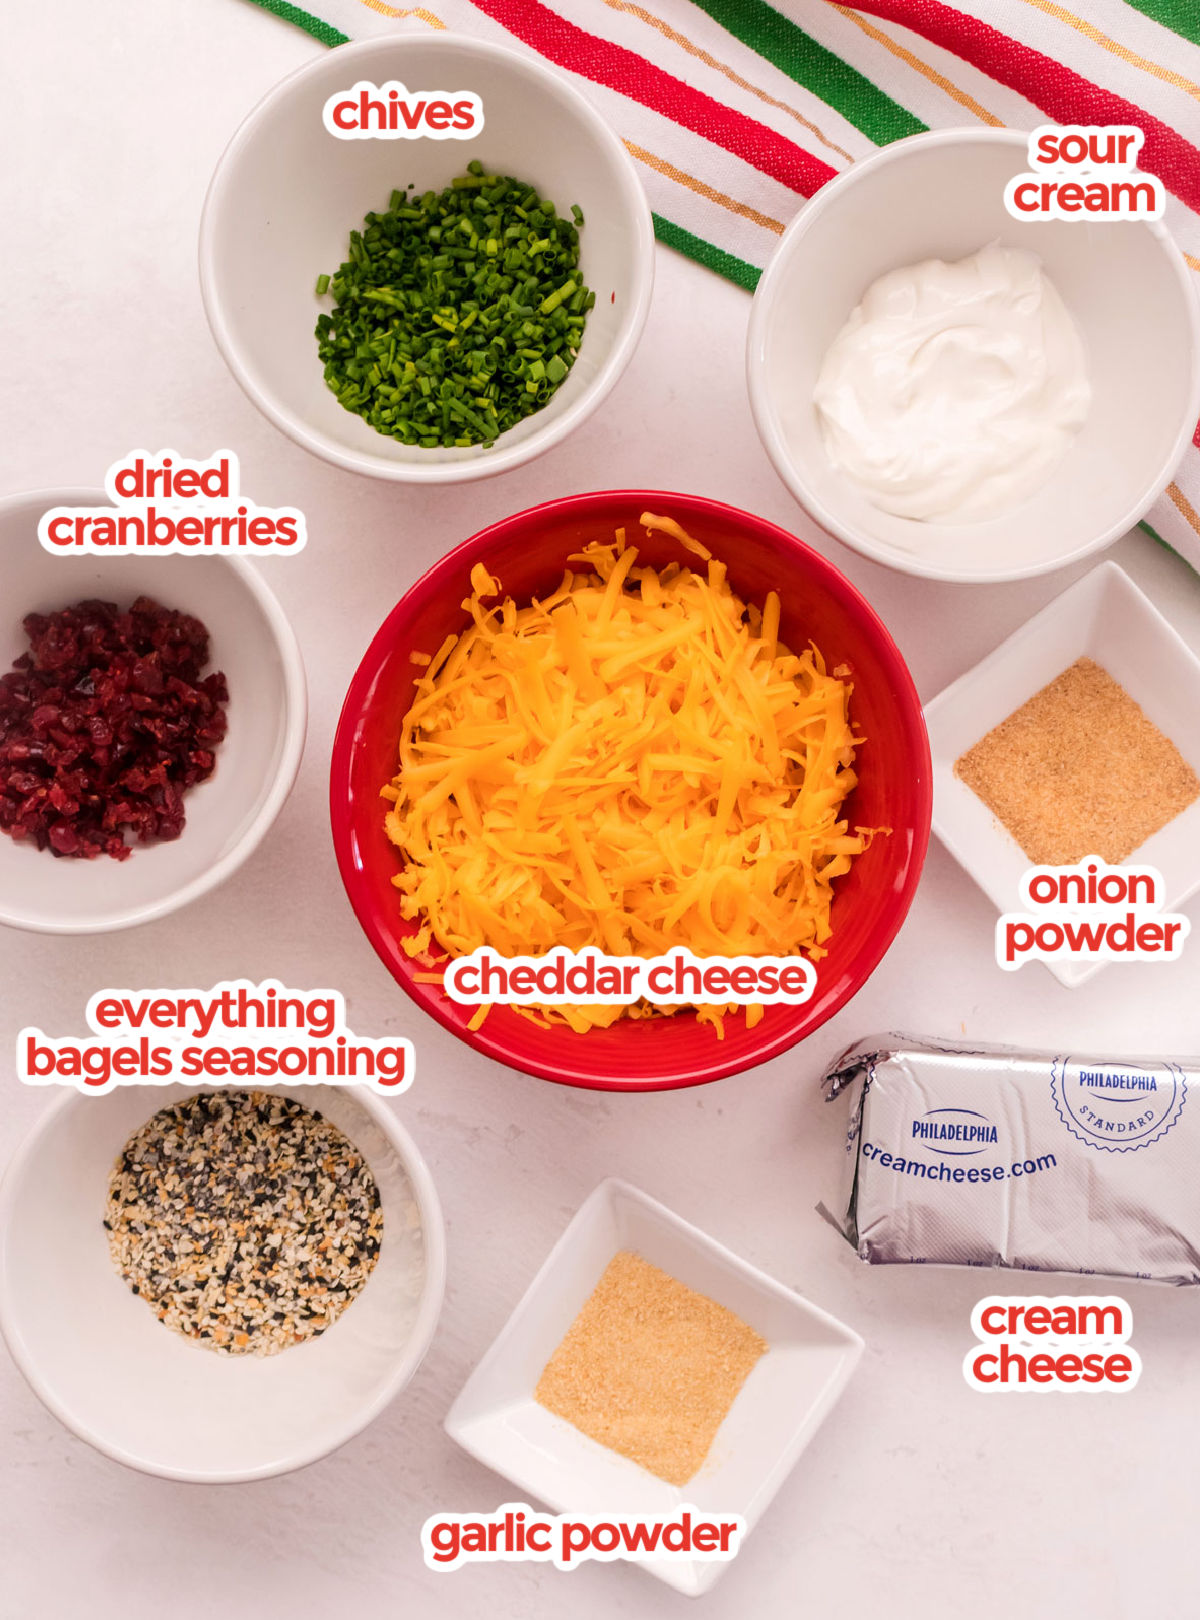 All the ingredients needed to make Cheese Ball Bites including sour cream, cream cheese, cheddar cheese, spices and toppings.